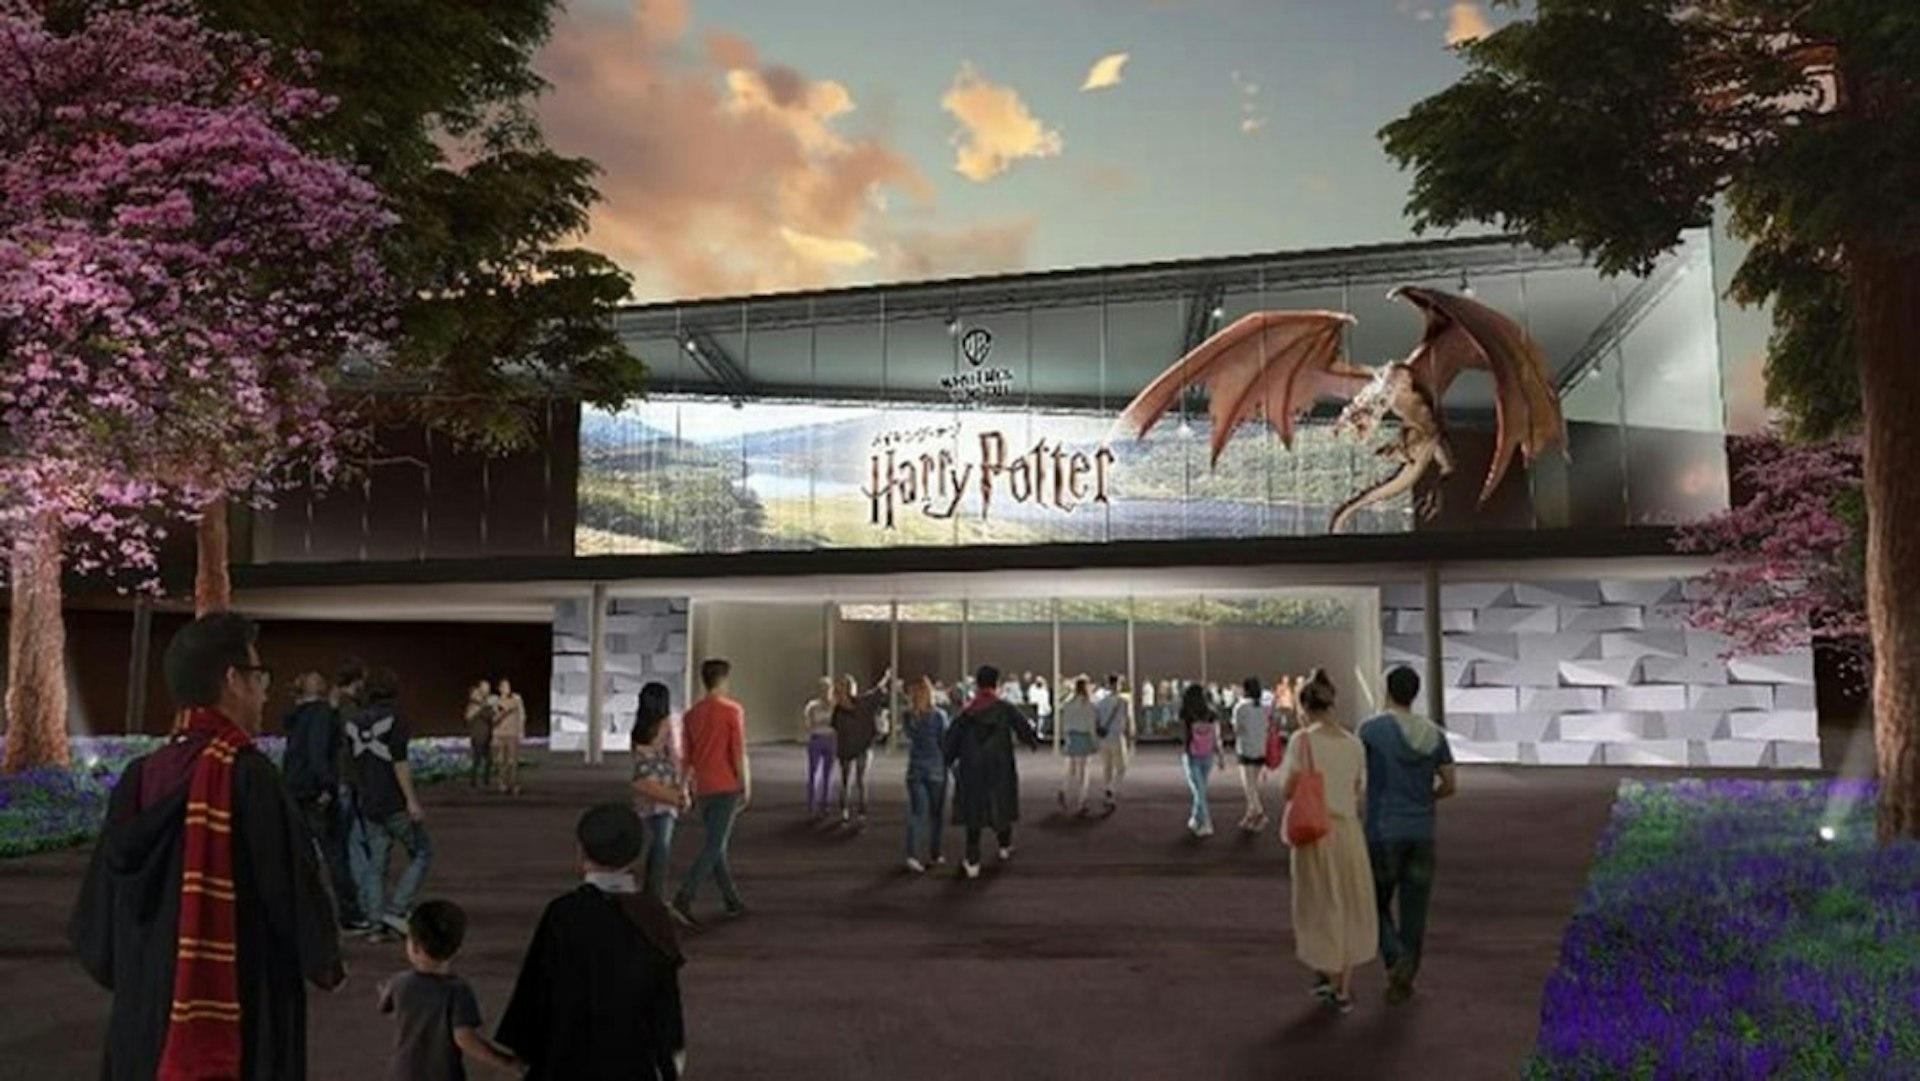 A rendering of the Harry Potter studio tour in Japan